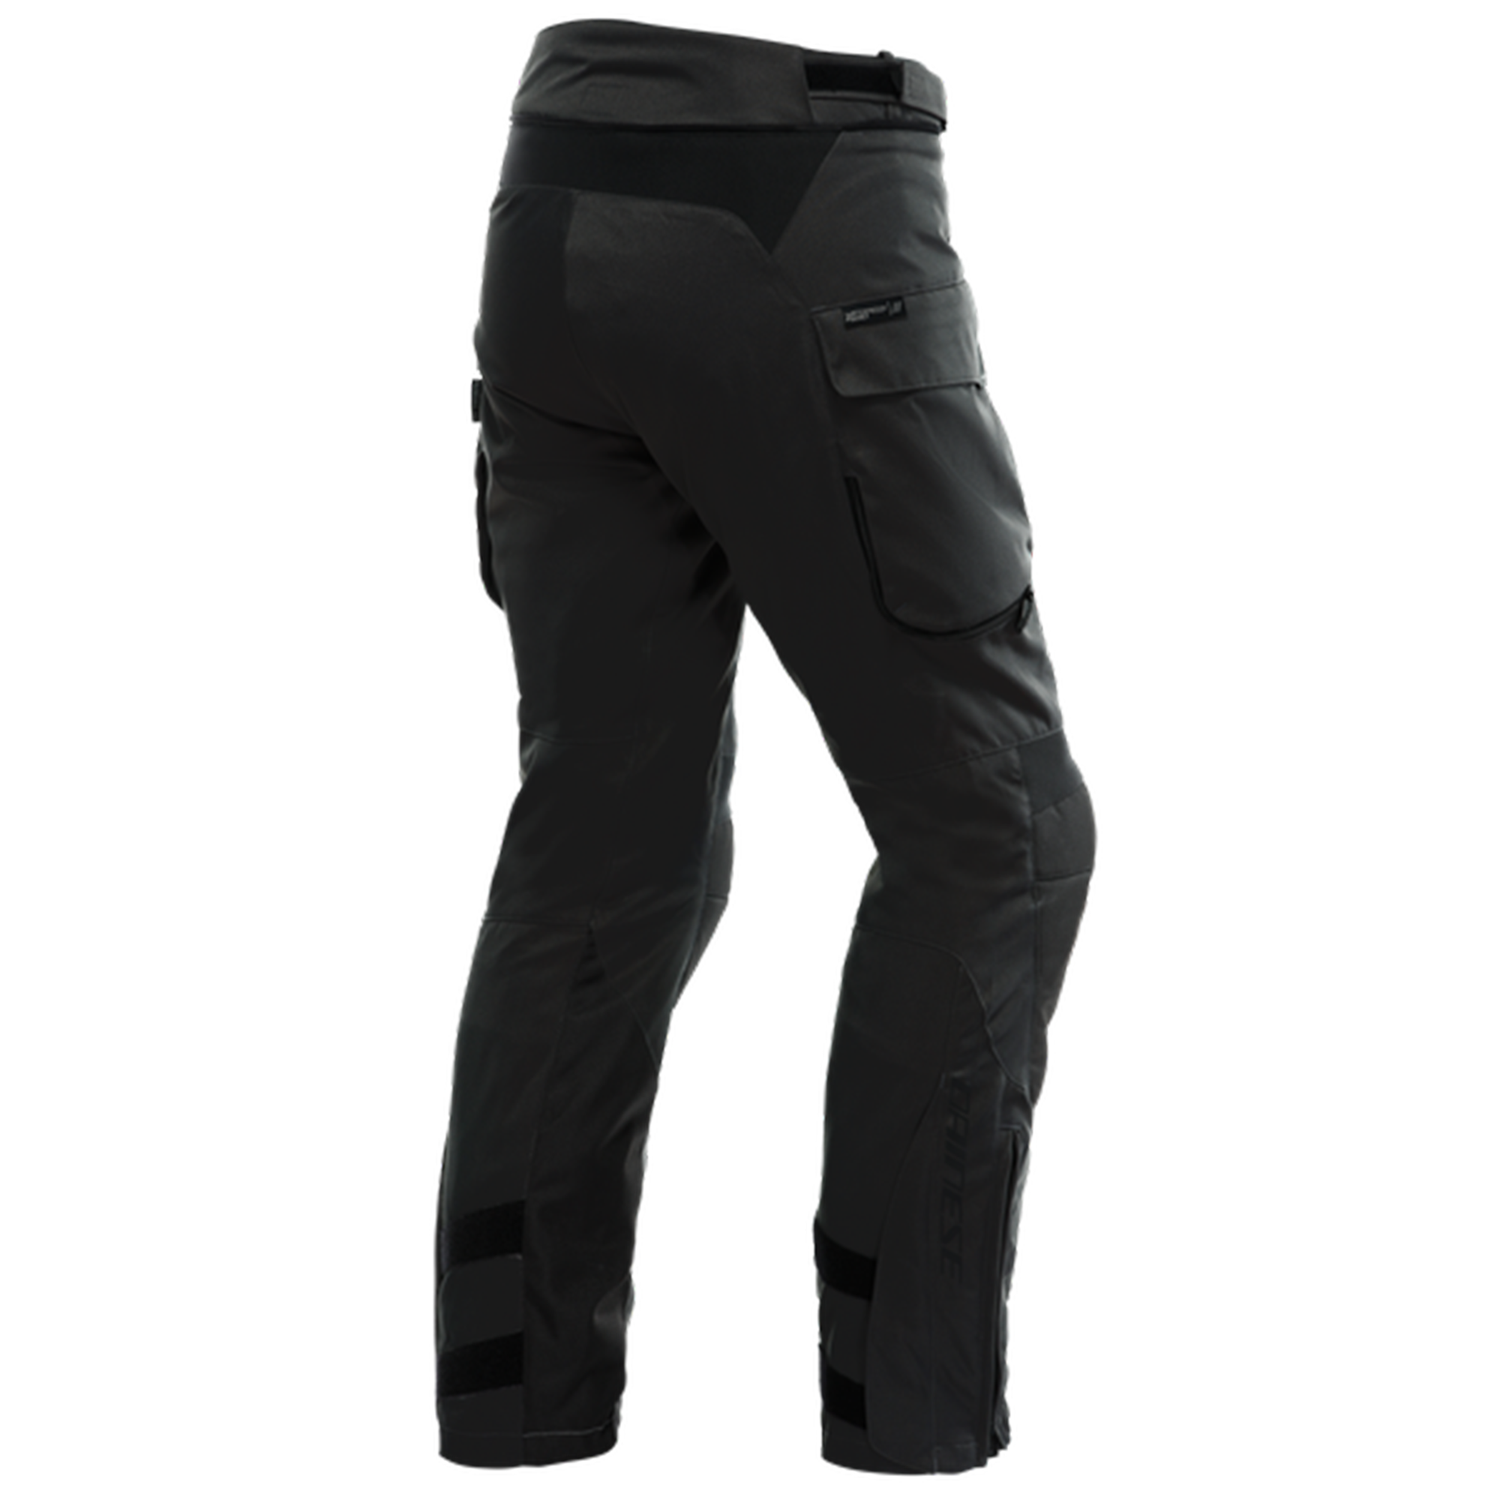 CONNERY D-DRY® PANTS